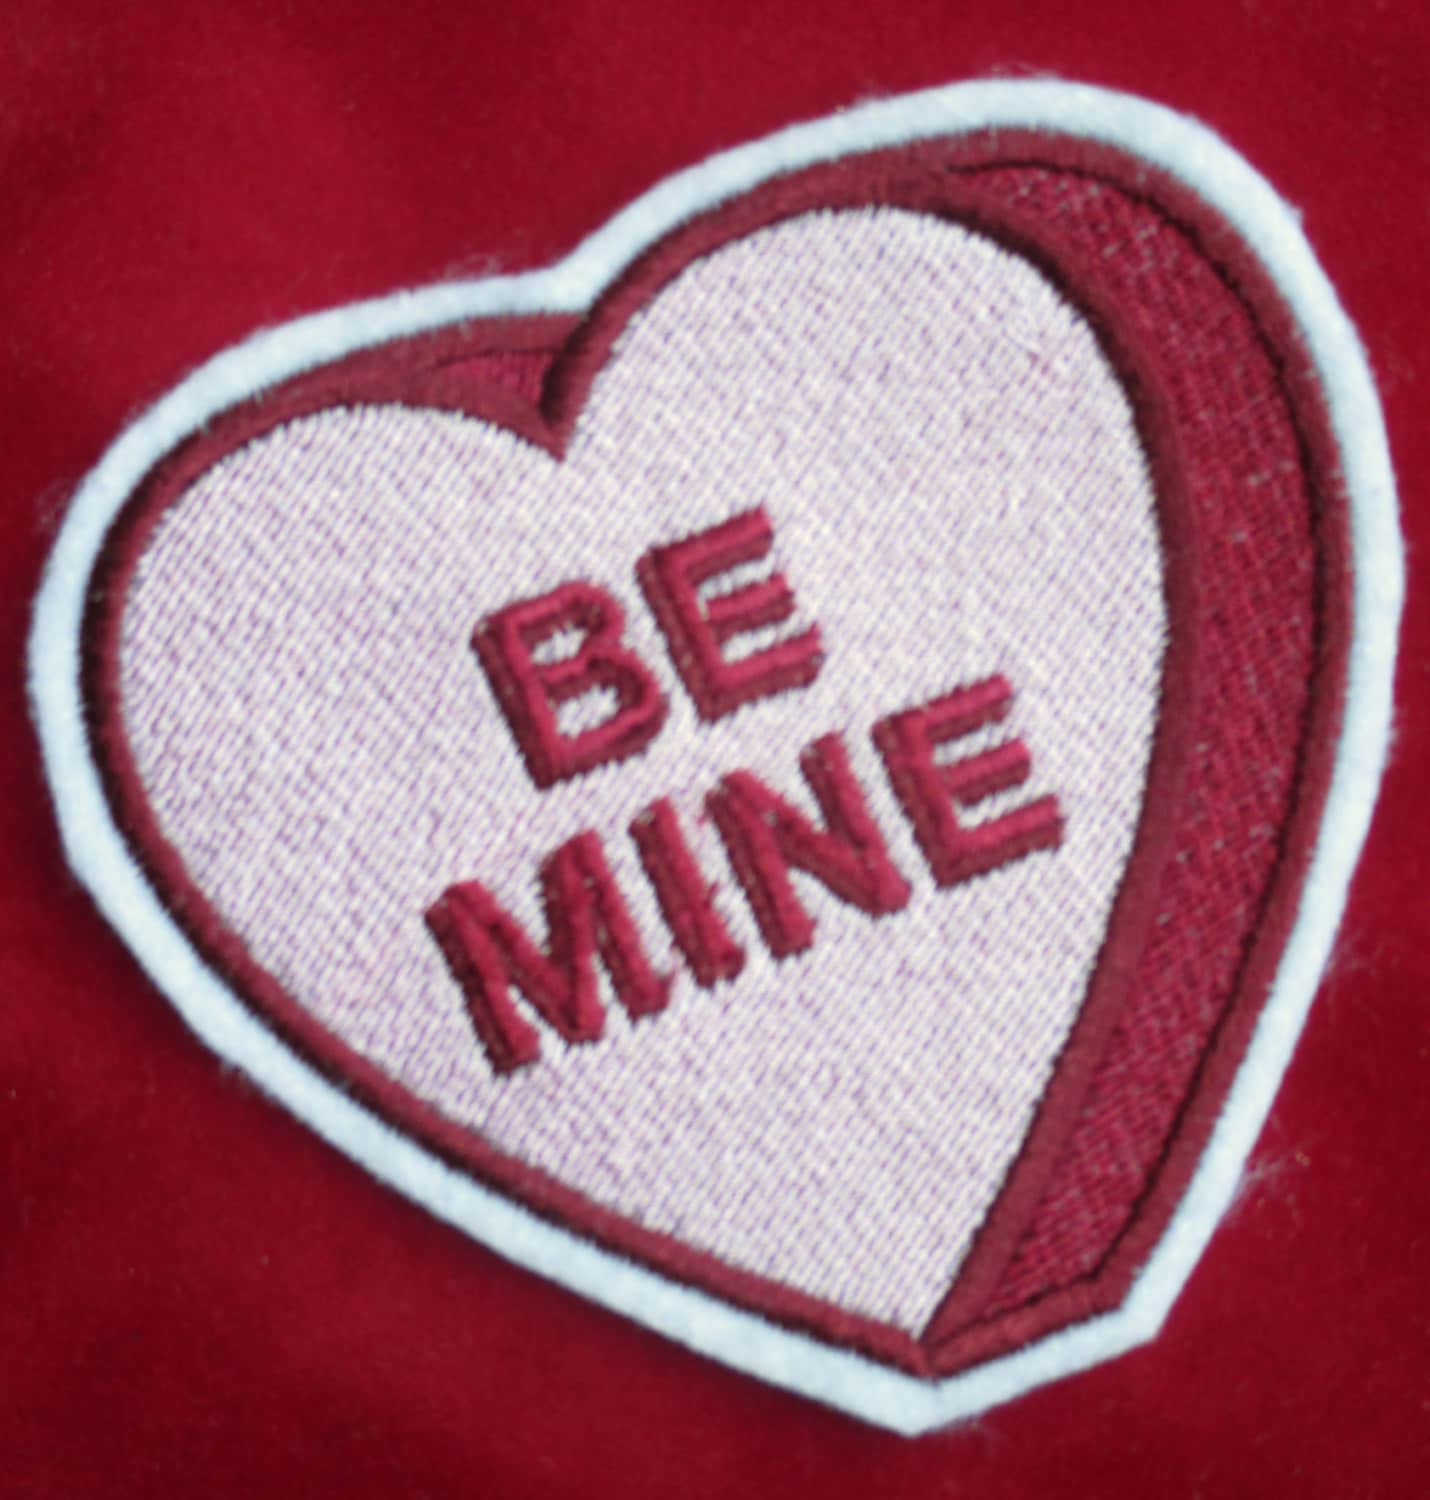  The Words Embroidery Iron On Patches for Clothing, Sticker Cute  Patches, Parches para Ropa, Sew On Patch for Backpack Jackets Jeans Shirt :  Everything Else